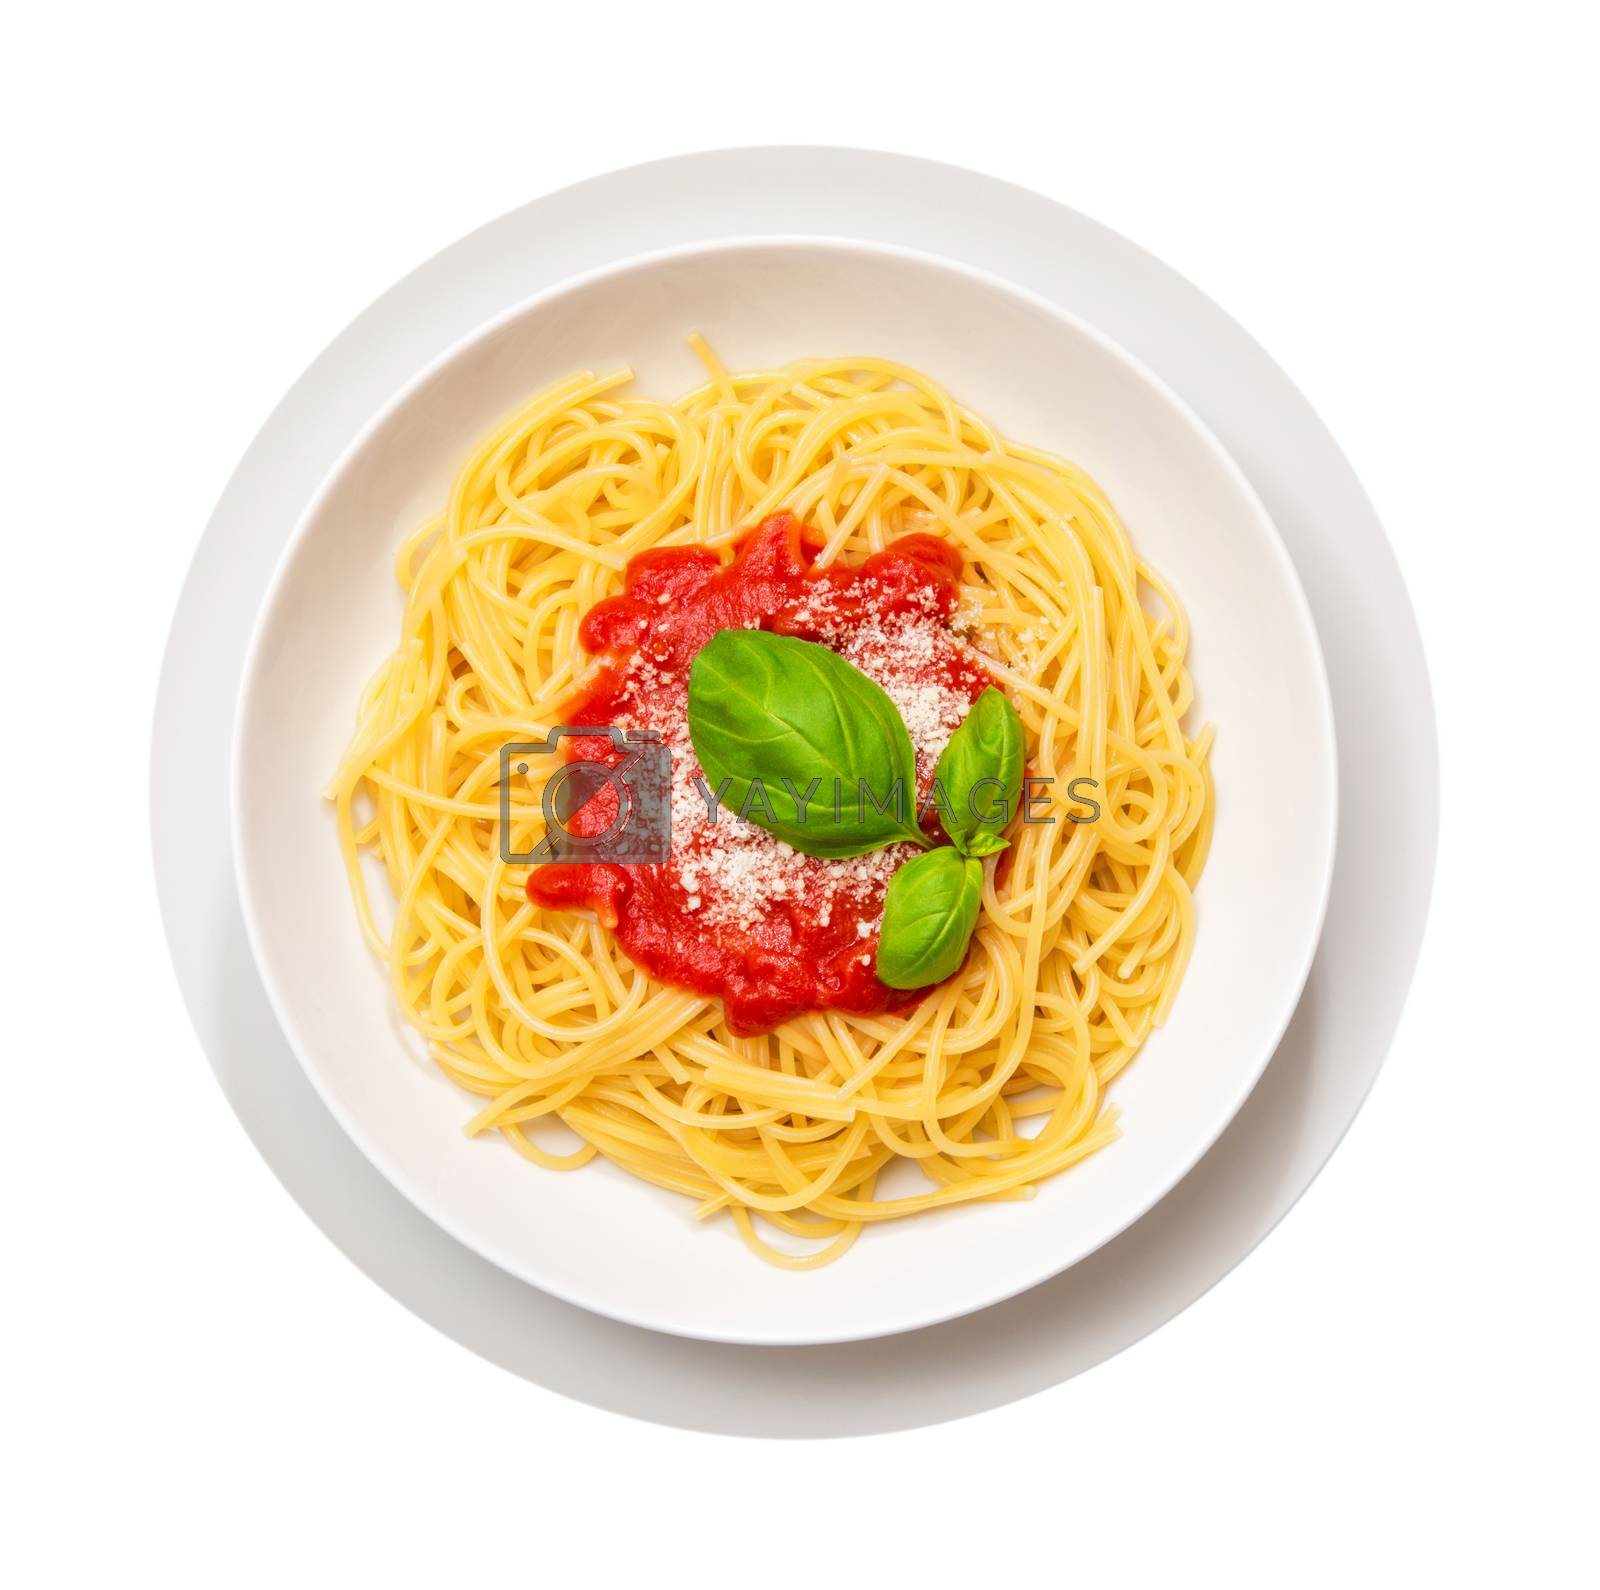 Royalty free image of spaghetti with basil and tomato by photobeps